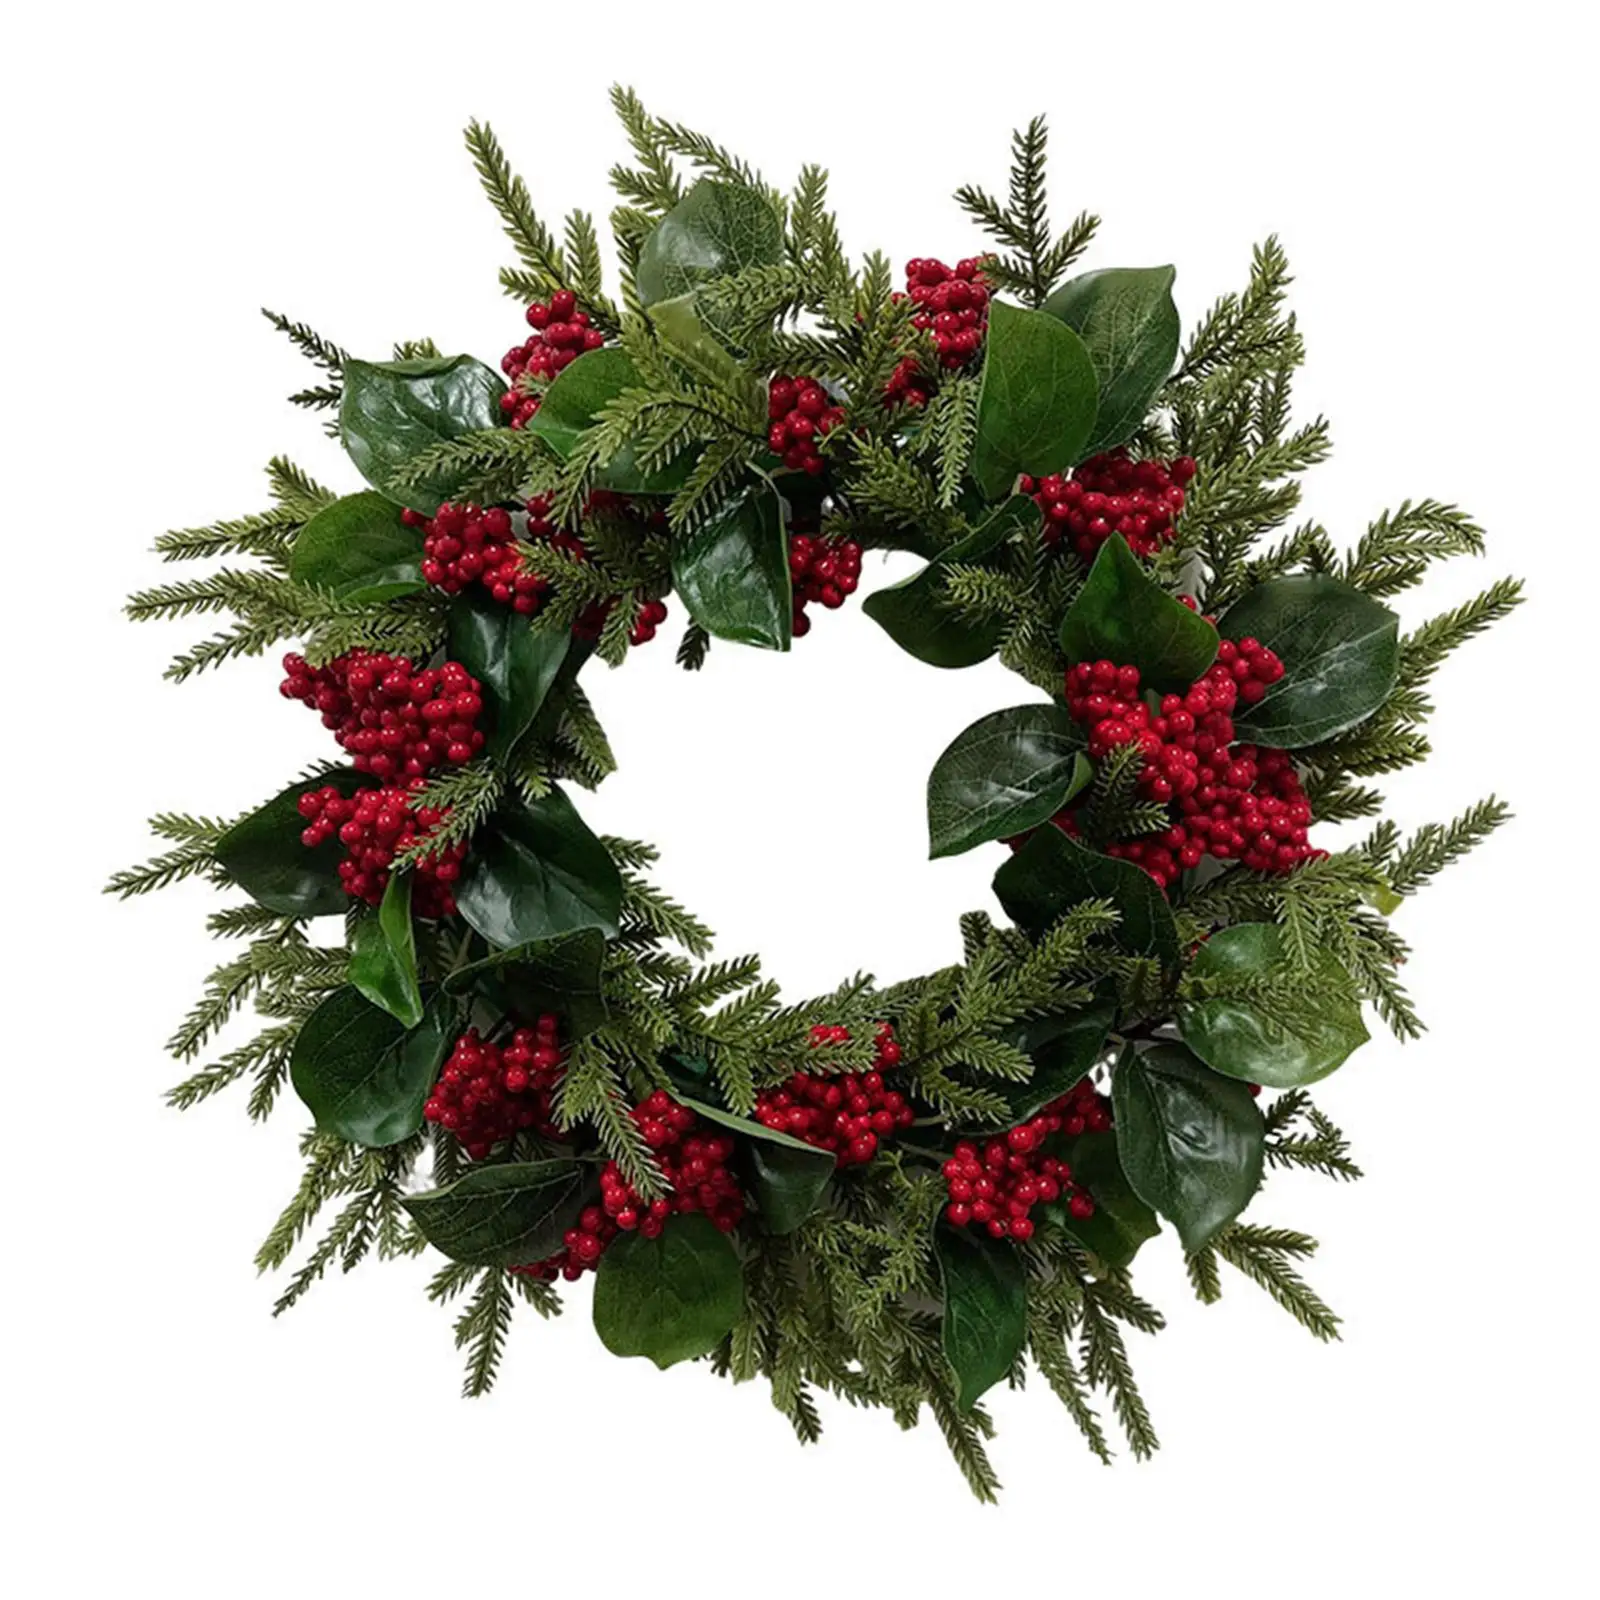 Christmas Wreath Front Door with Red Berries Home Decor Artificial Floral Wreath for New Year Farmhouse Holiday Window Outdoor